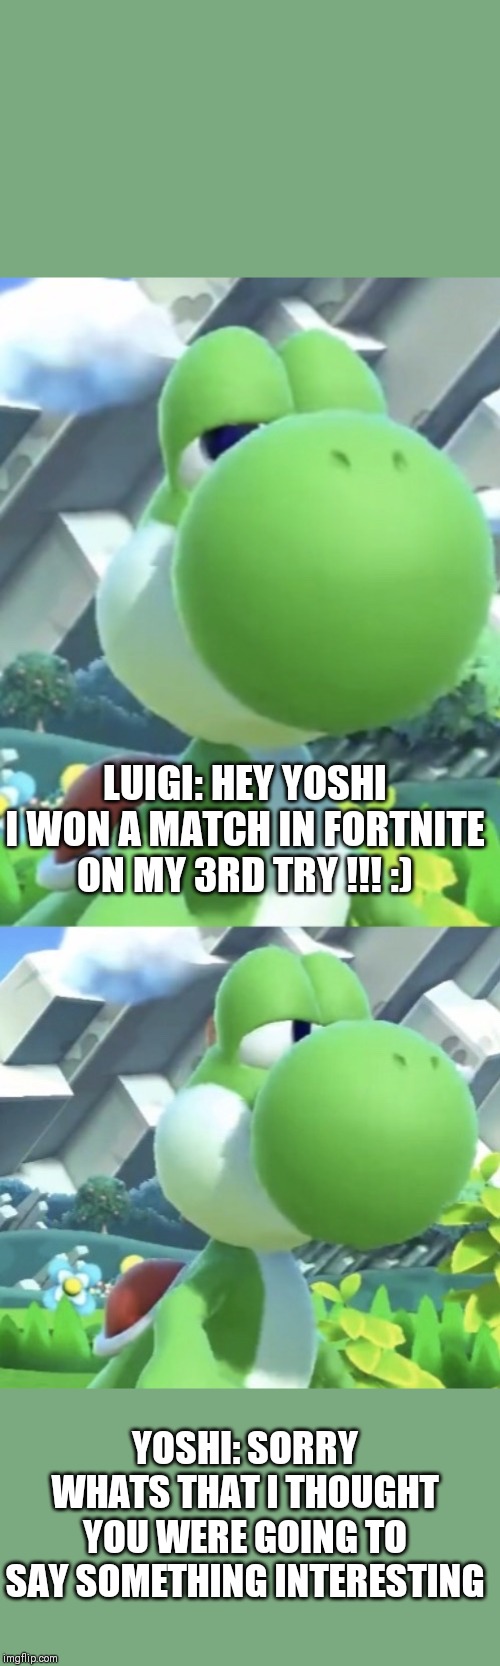 Yoshi’s not interested | LUIGI: HEY YOSHI I WON A MATCH IN FORTNITE ON MY 3RD TRY !!! :); YOSHI: SORRY WHATS THAT I THOUGHT YOU WERE GOING TO SAY SOMETHING INTERESTING | image tagged in yoshis not interested | made w/ Imgflip meme maker